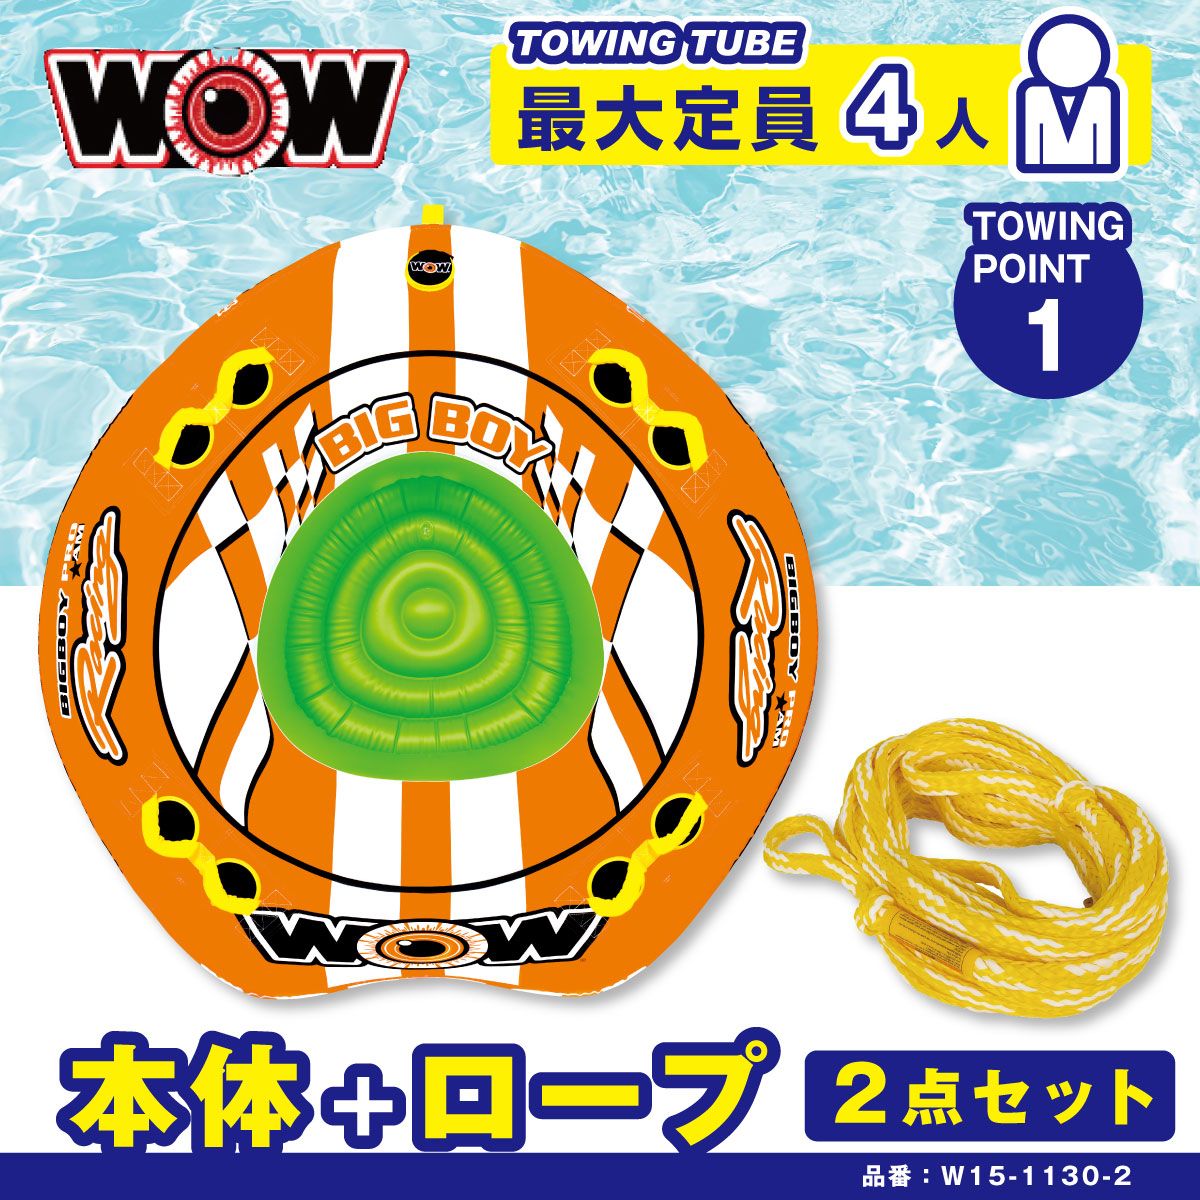 [Set of 2] WOW BIGBOY RACING 4 people W15-1130 Water toy Banana boat Towing tube Rubber boat 